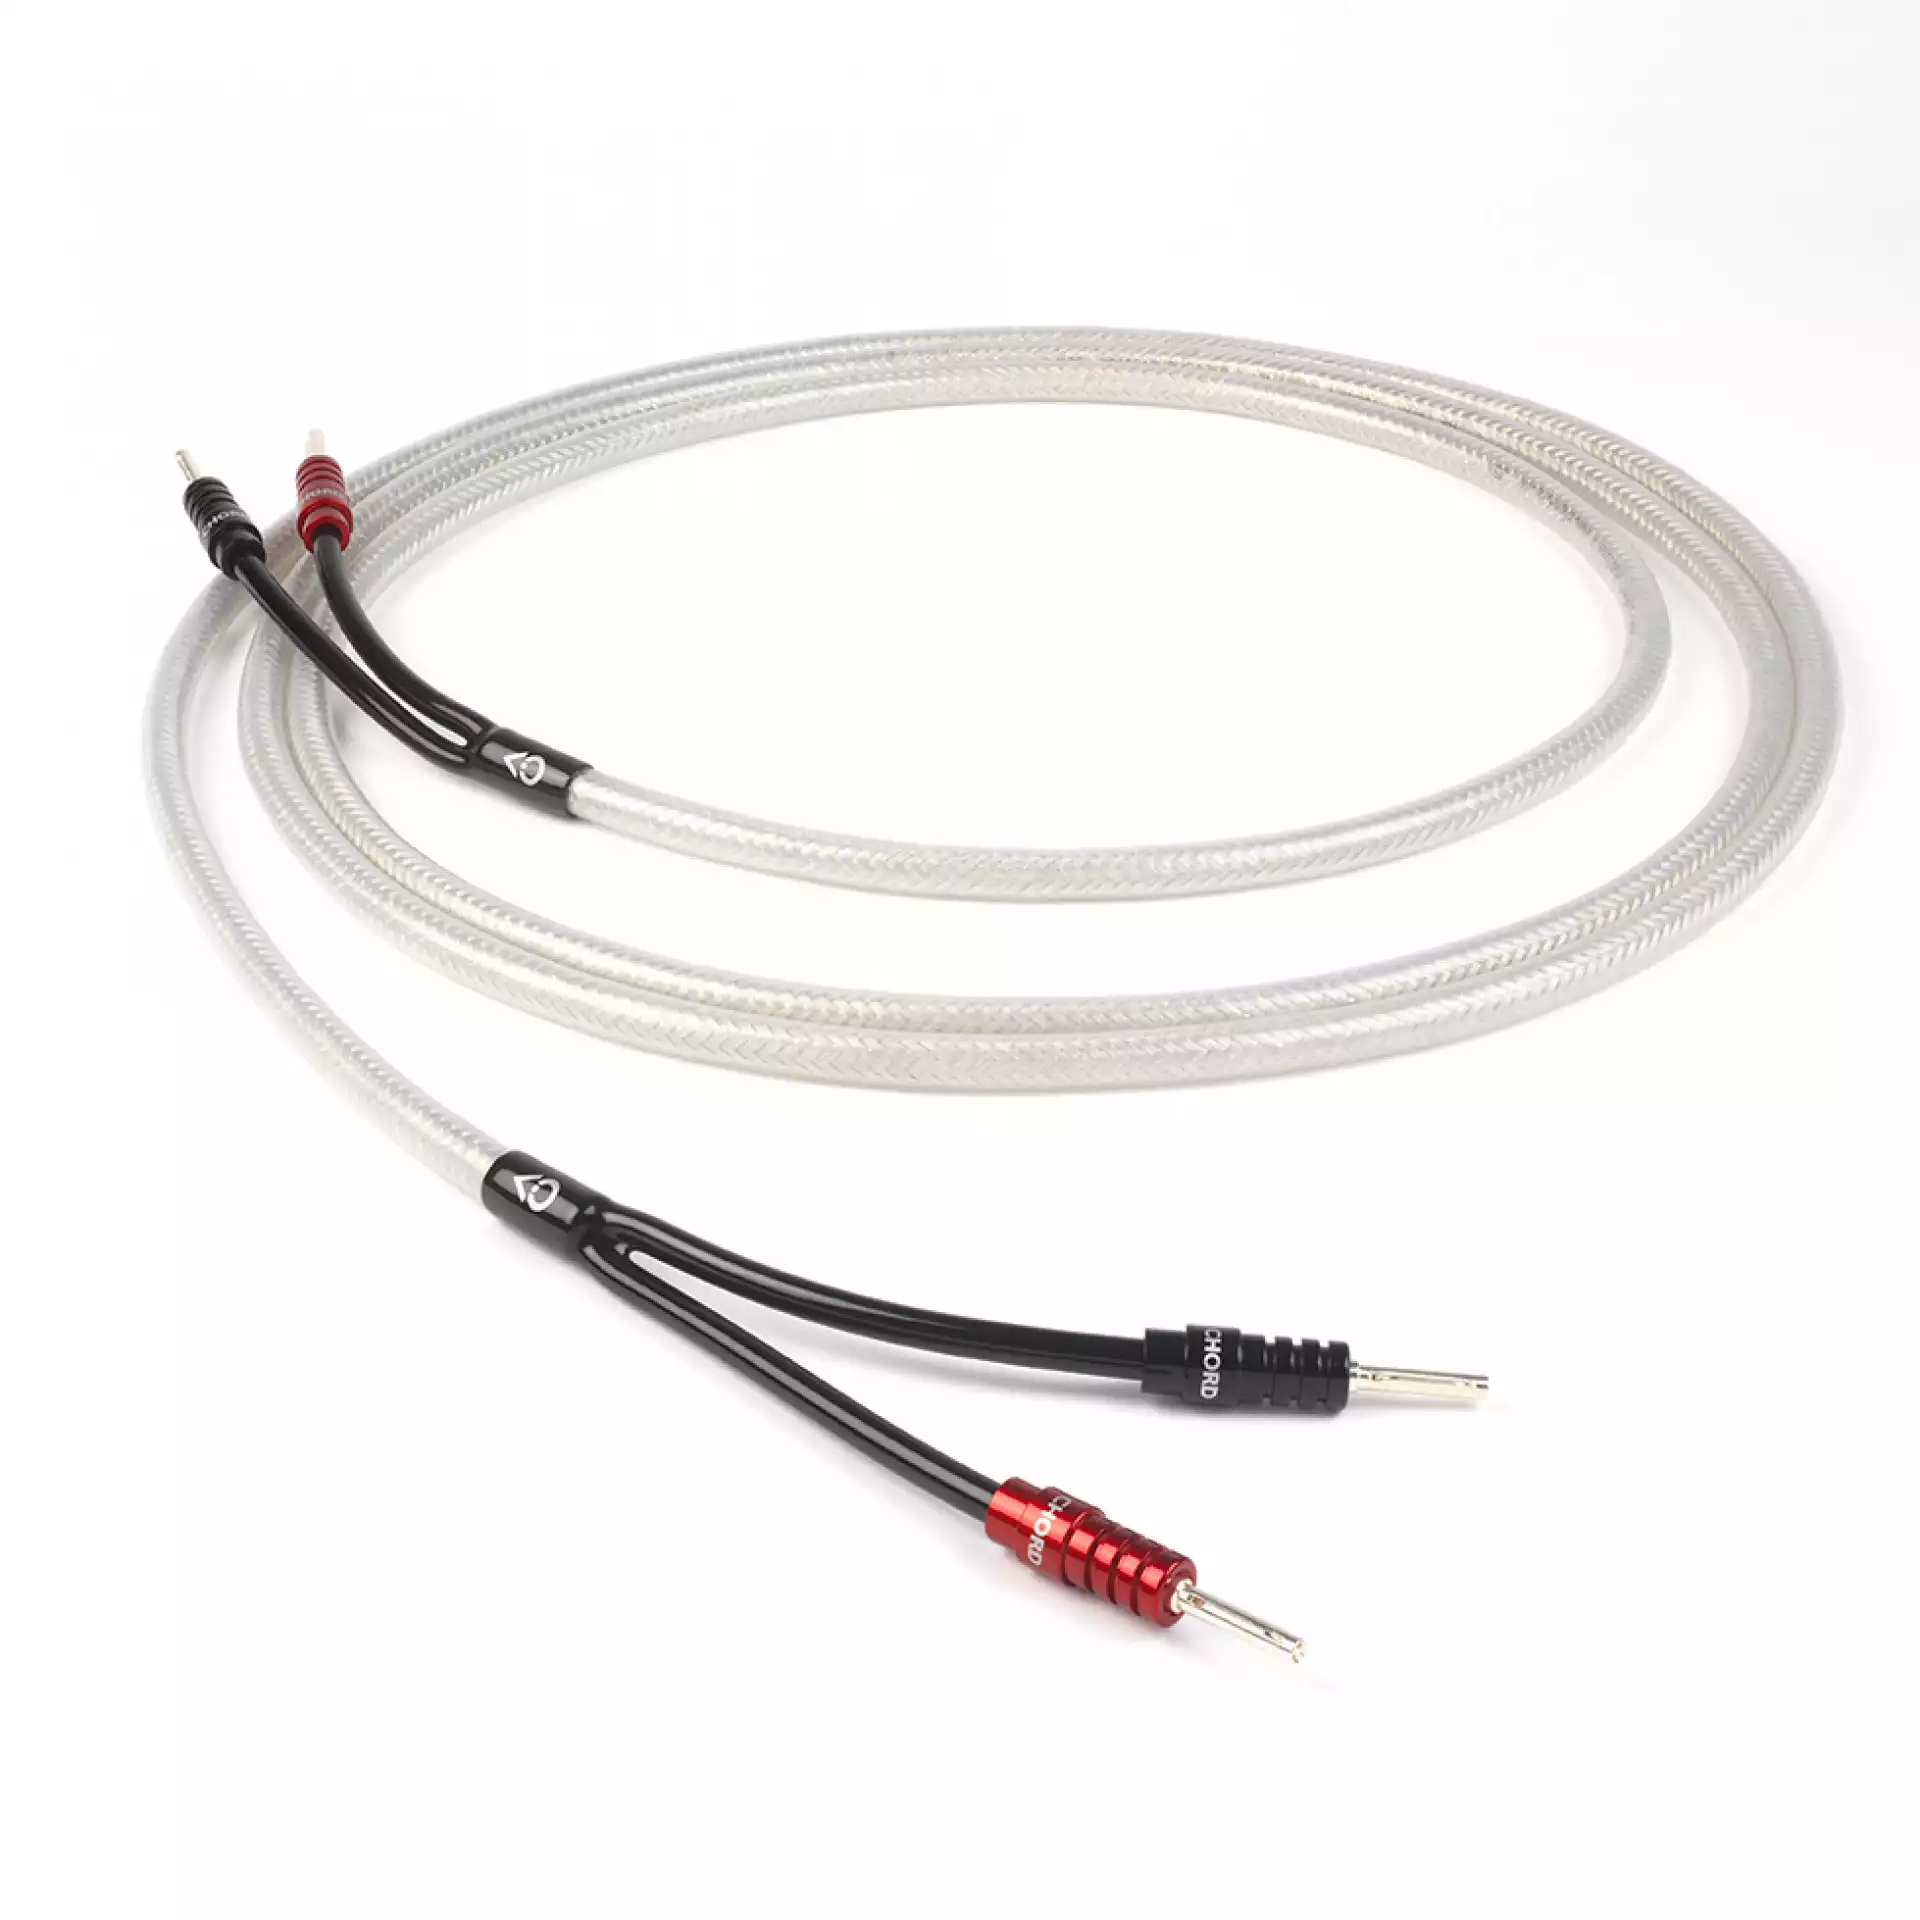 CHORD Shawline X Speaker Cable 3m